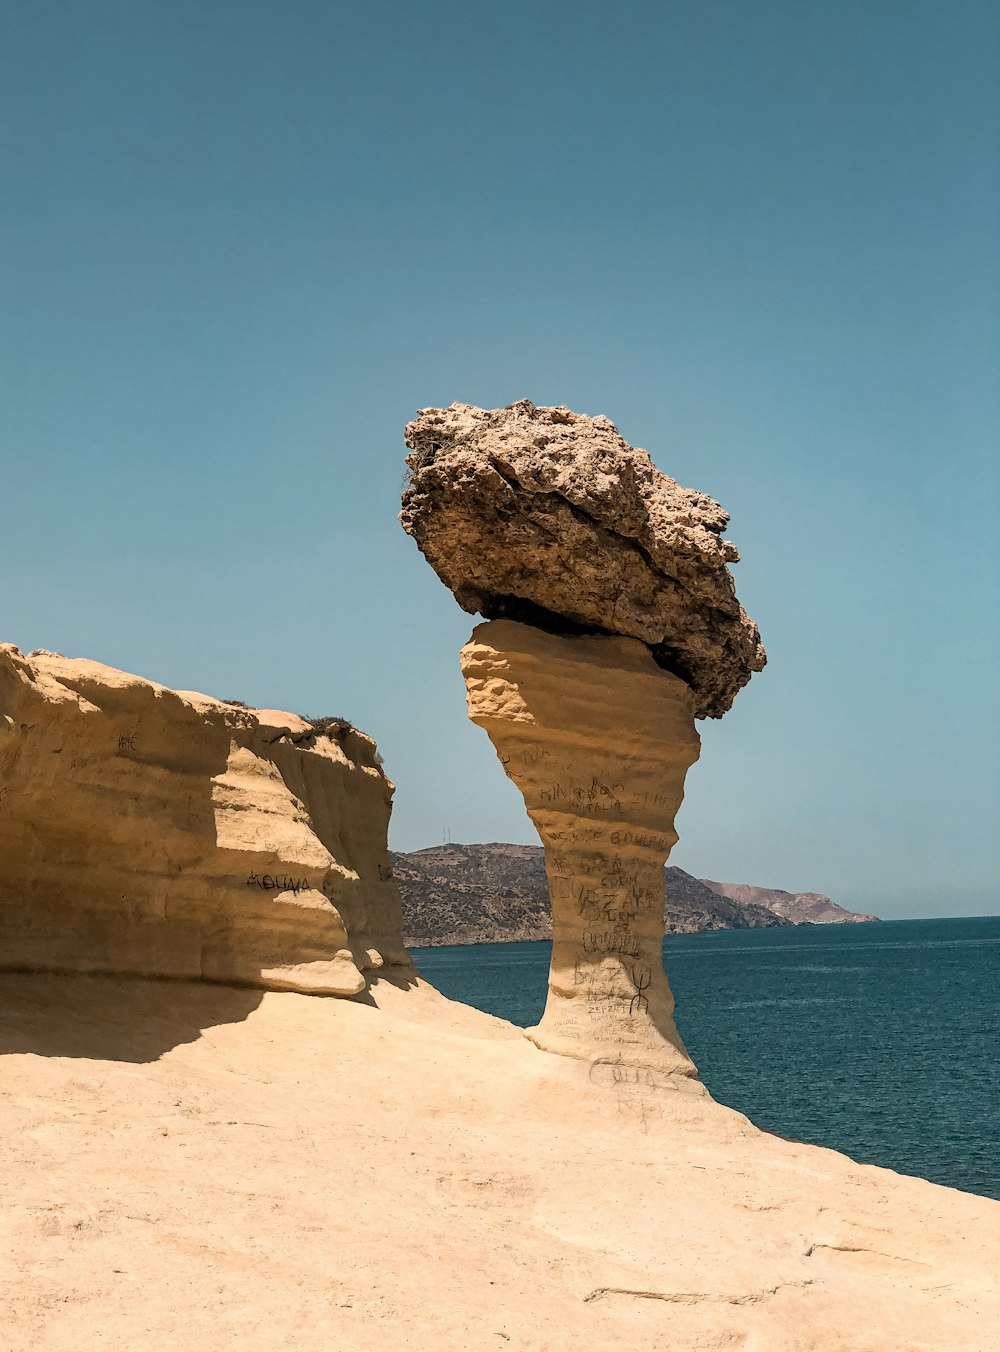 brown rock formation near body of water during daytime